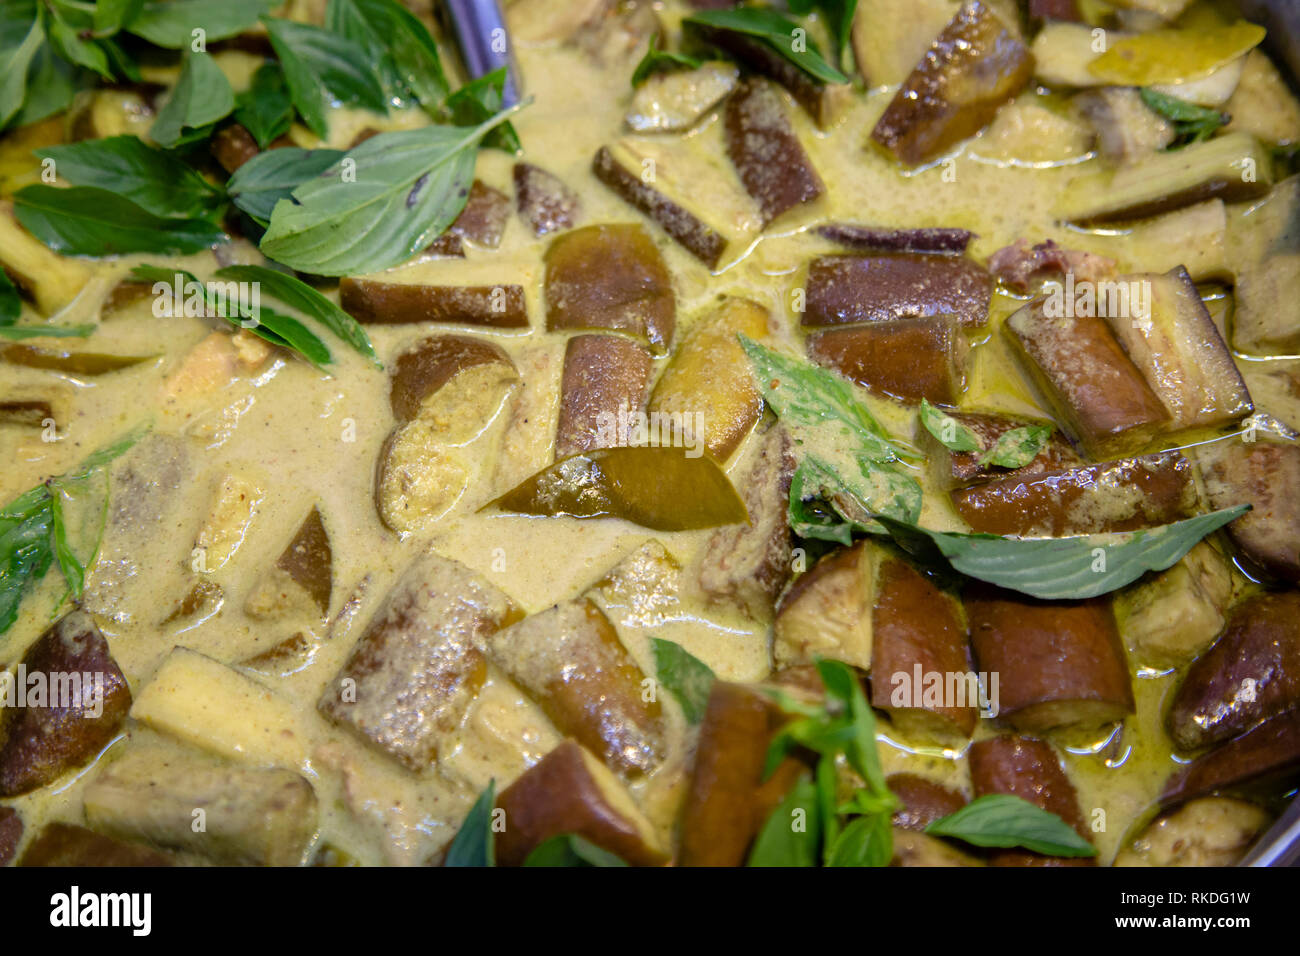 Thai green curry or kaeng khiao wan is a traditional food dish in Thailand. Stock Photo